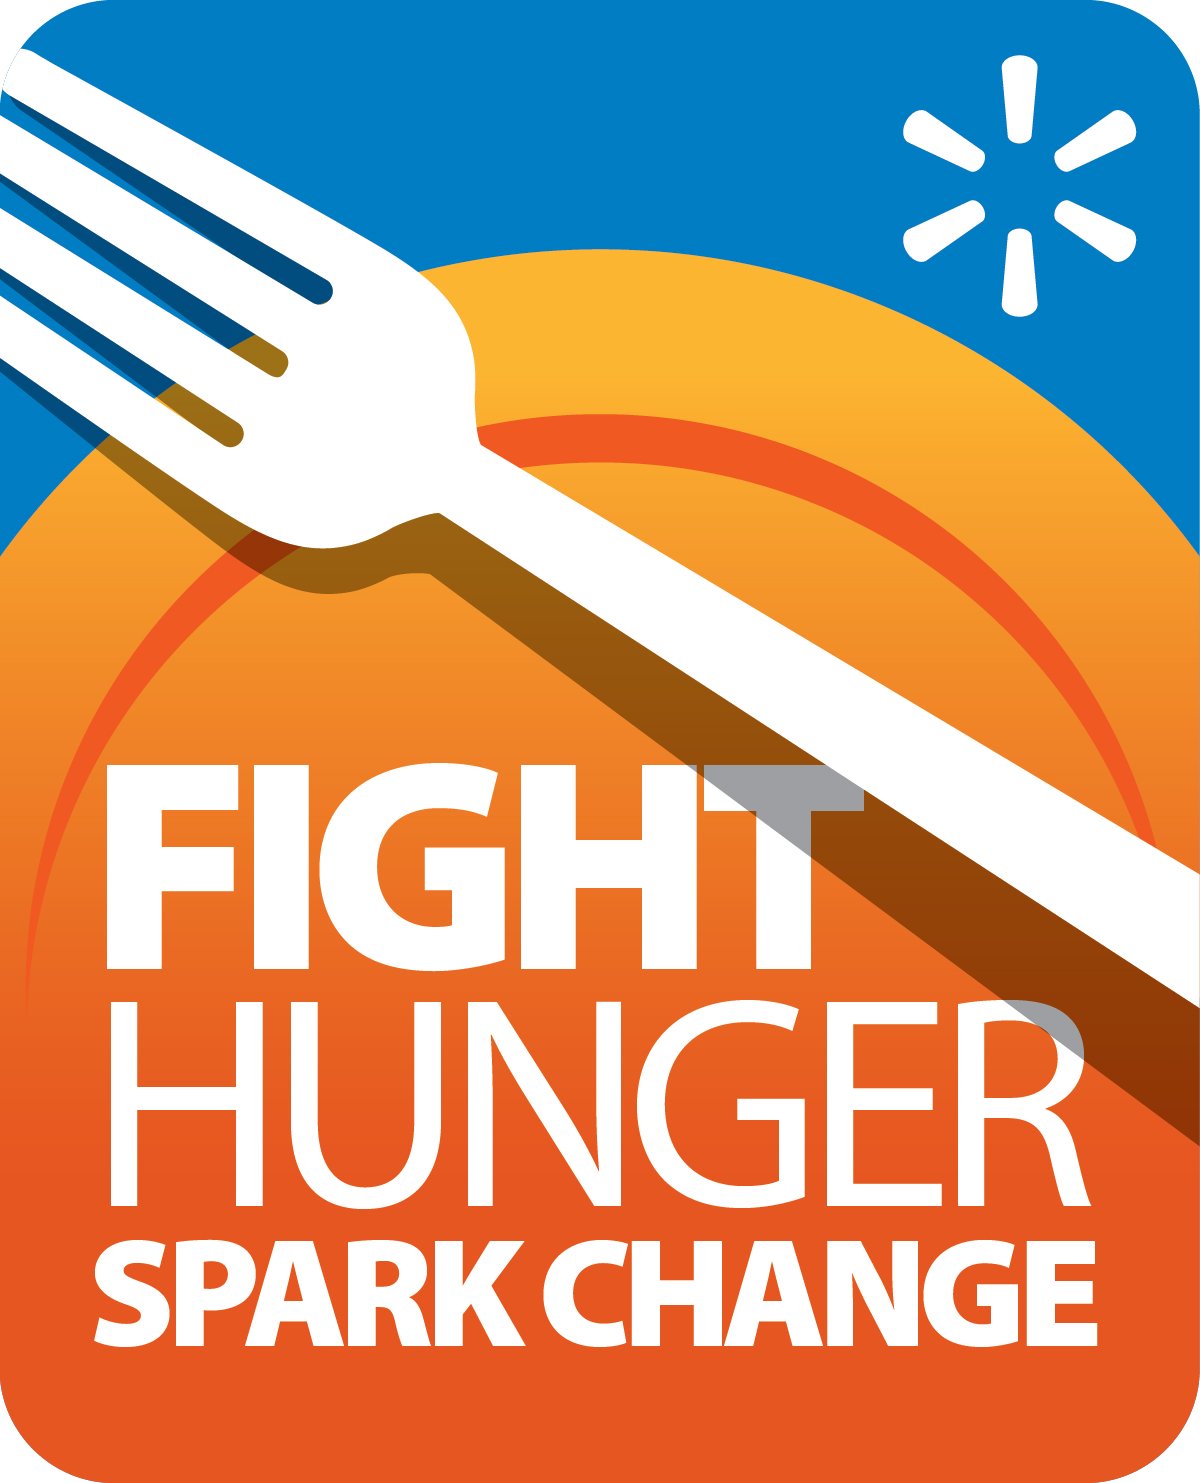 2022 Fight Hunger. Spark Change. - Food Bank for the Heartland